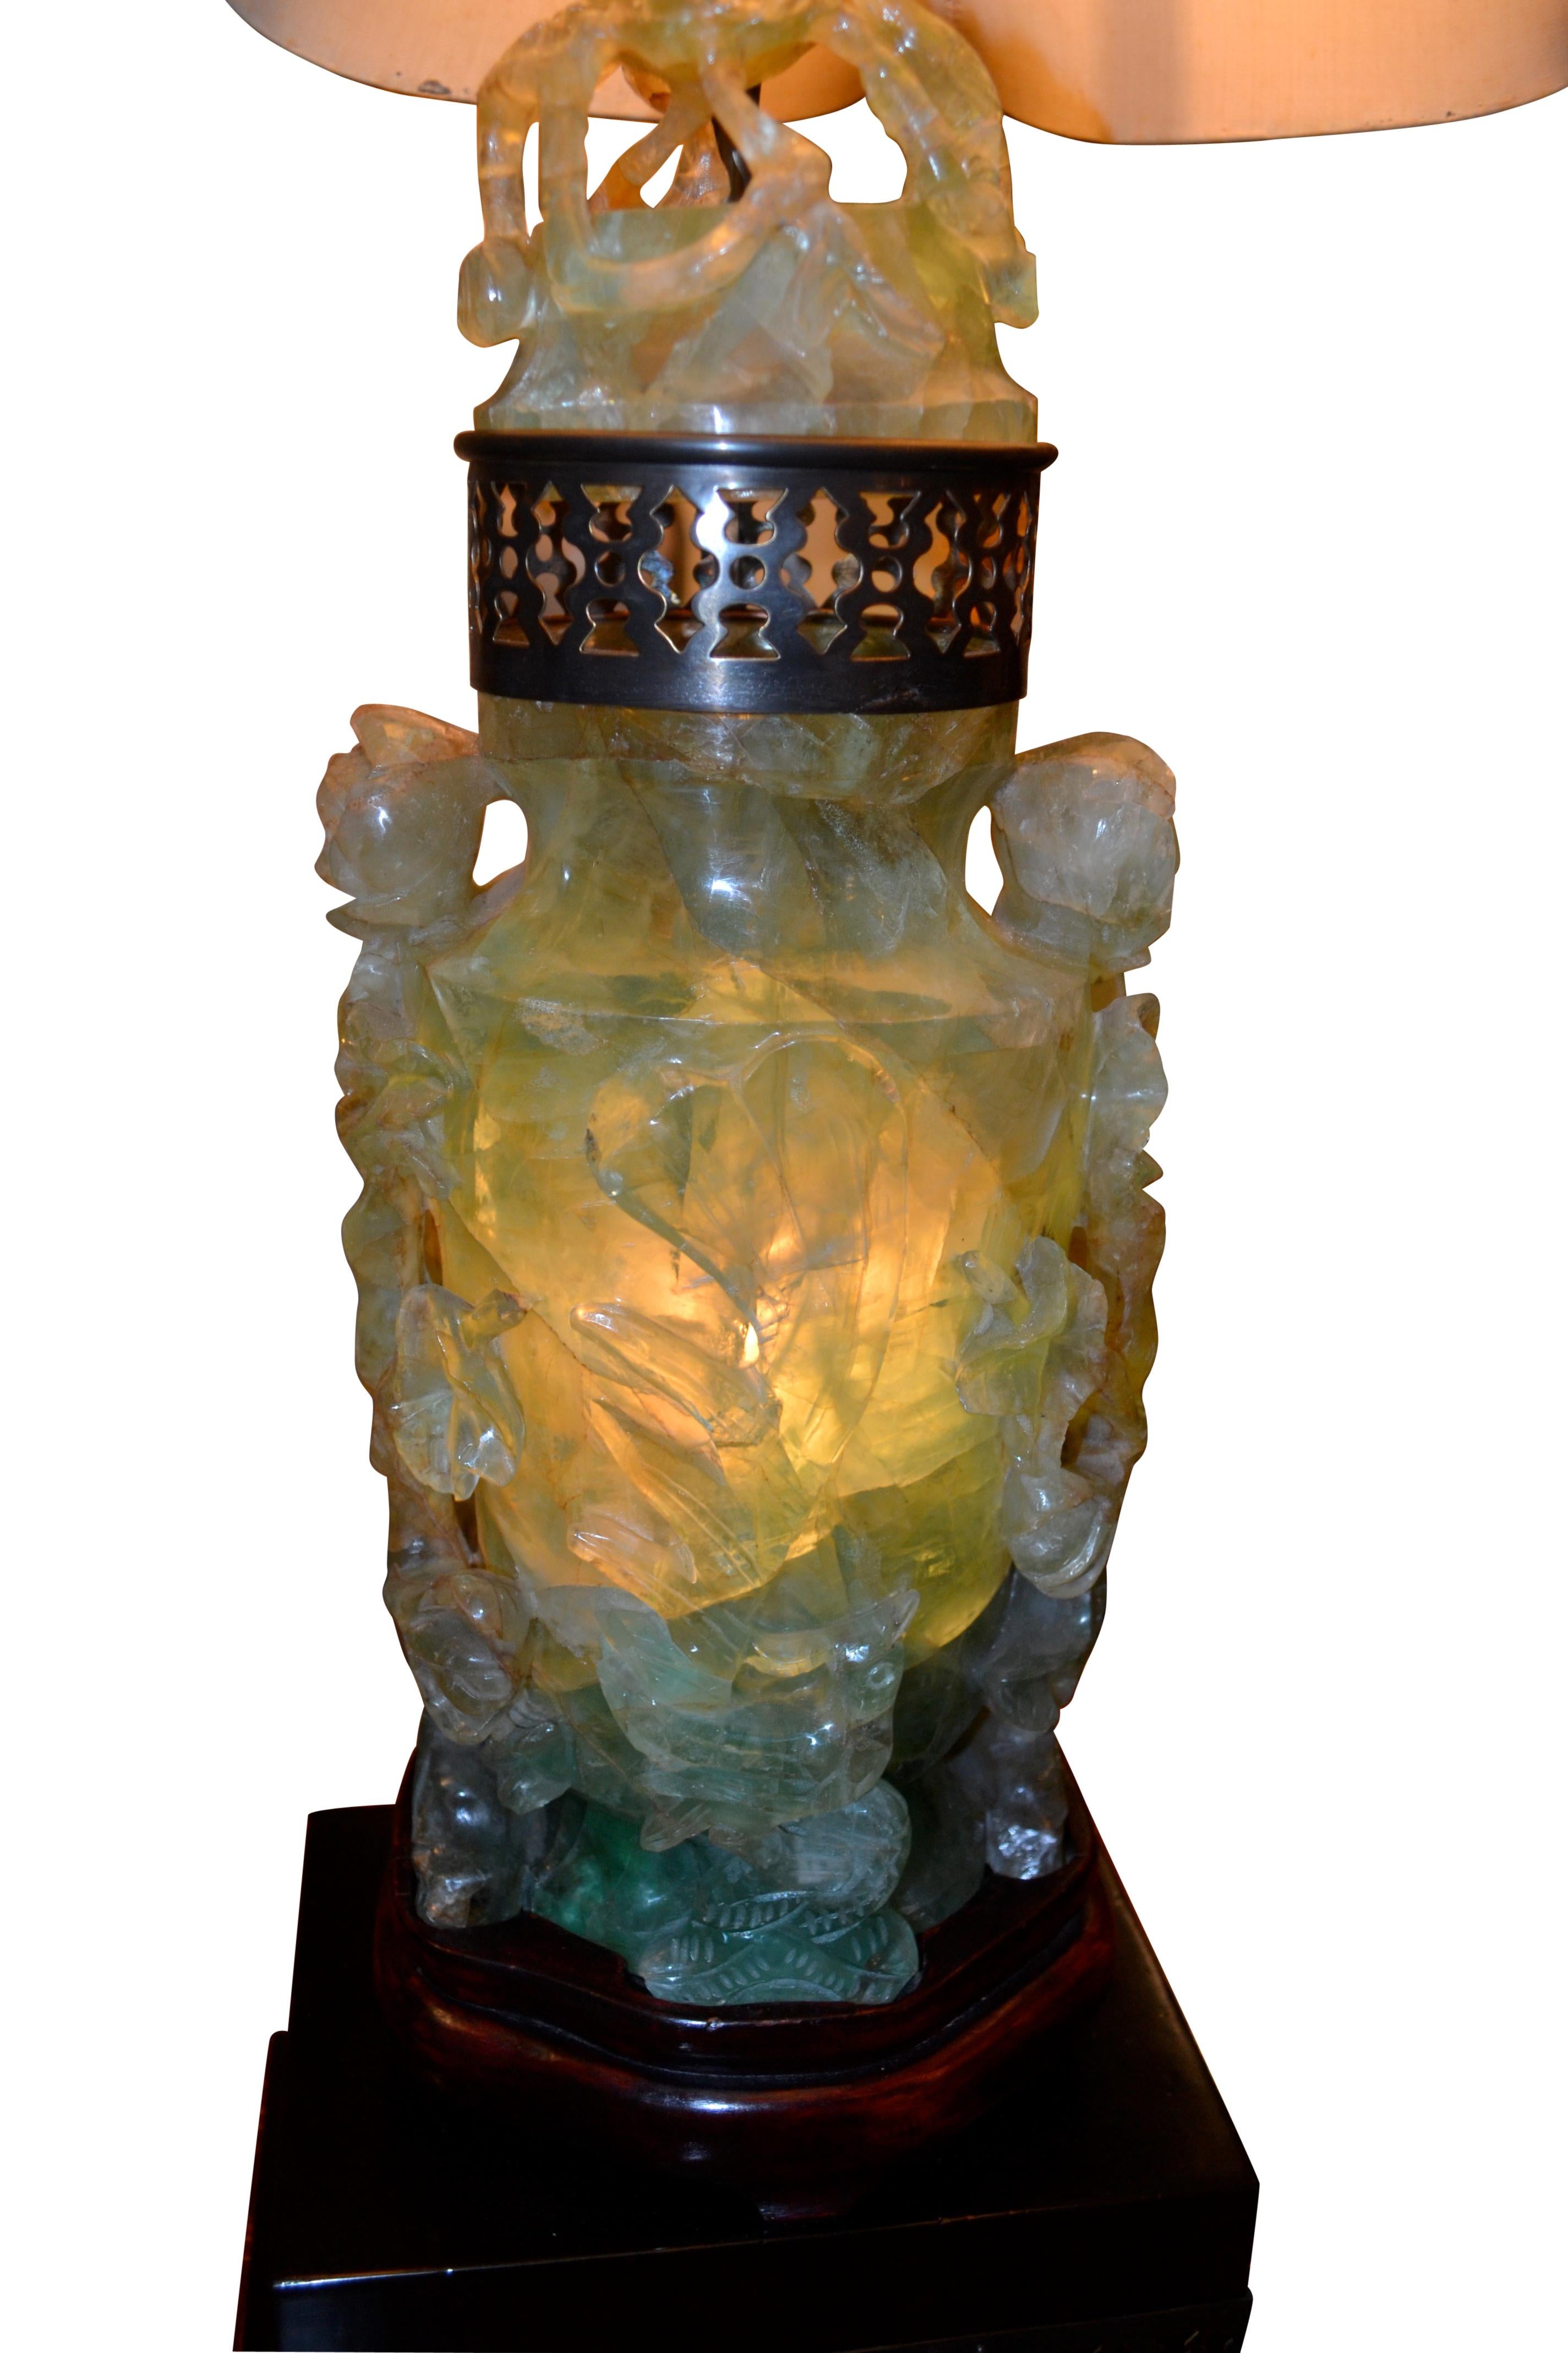 The stone bodies of this type of interior illuminated lamp are often referred to as quartz, jadeite or even jade but are in fact of the fluorite family, a softer sone more easily carved. The hollow urn bodies are carved all around with tree trunks